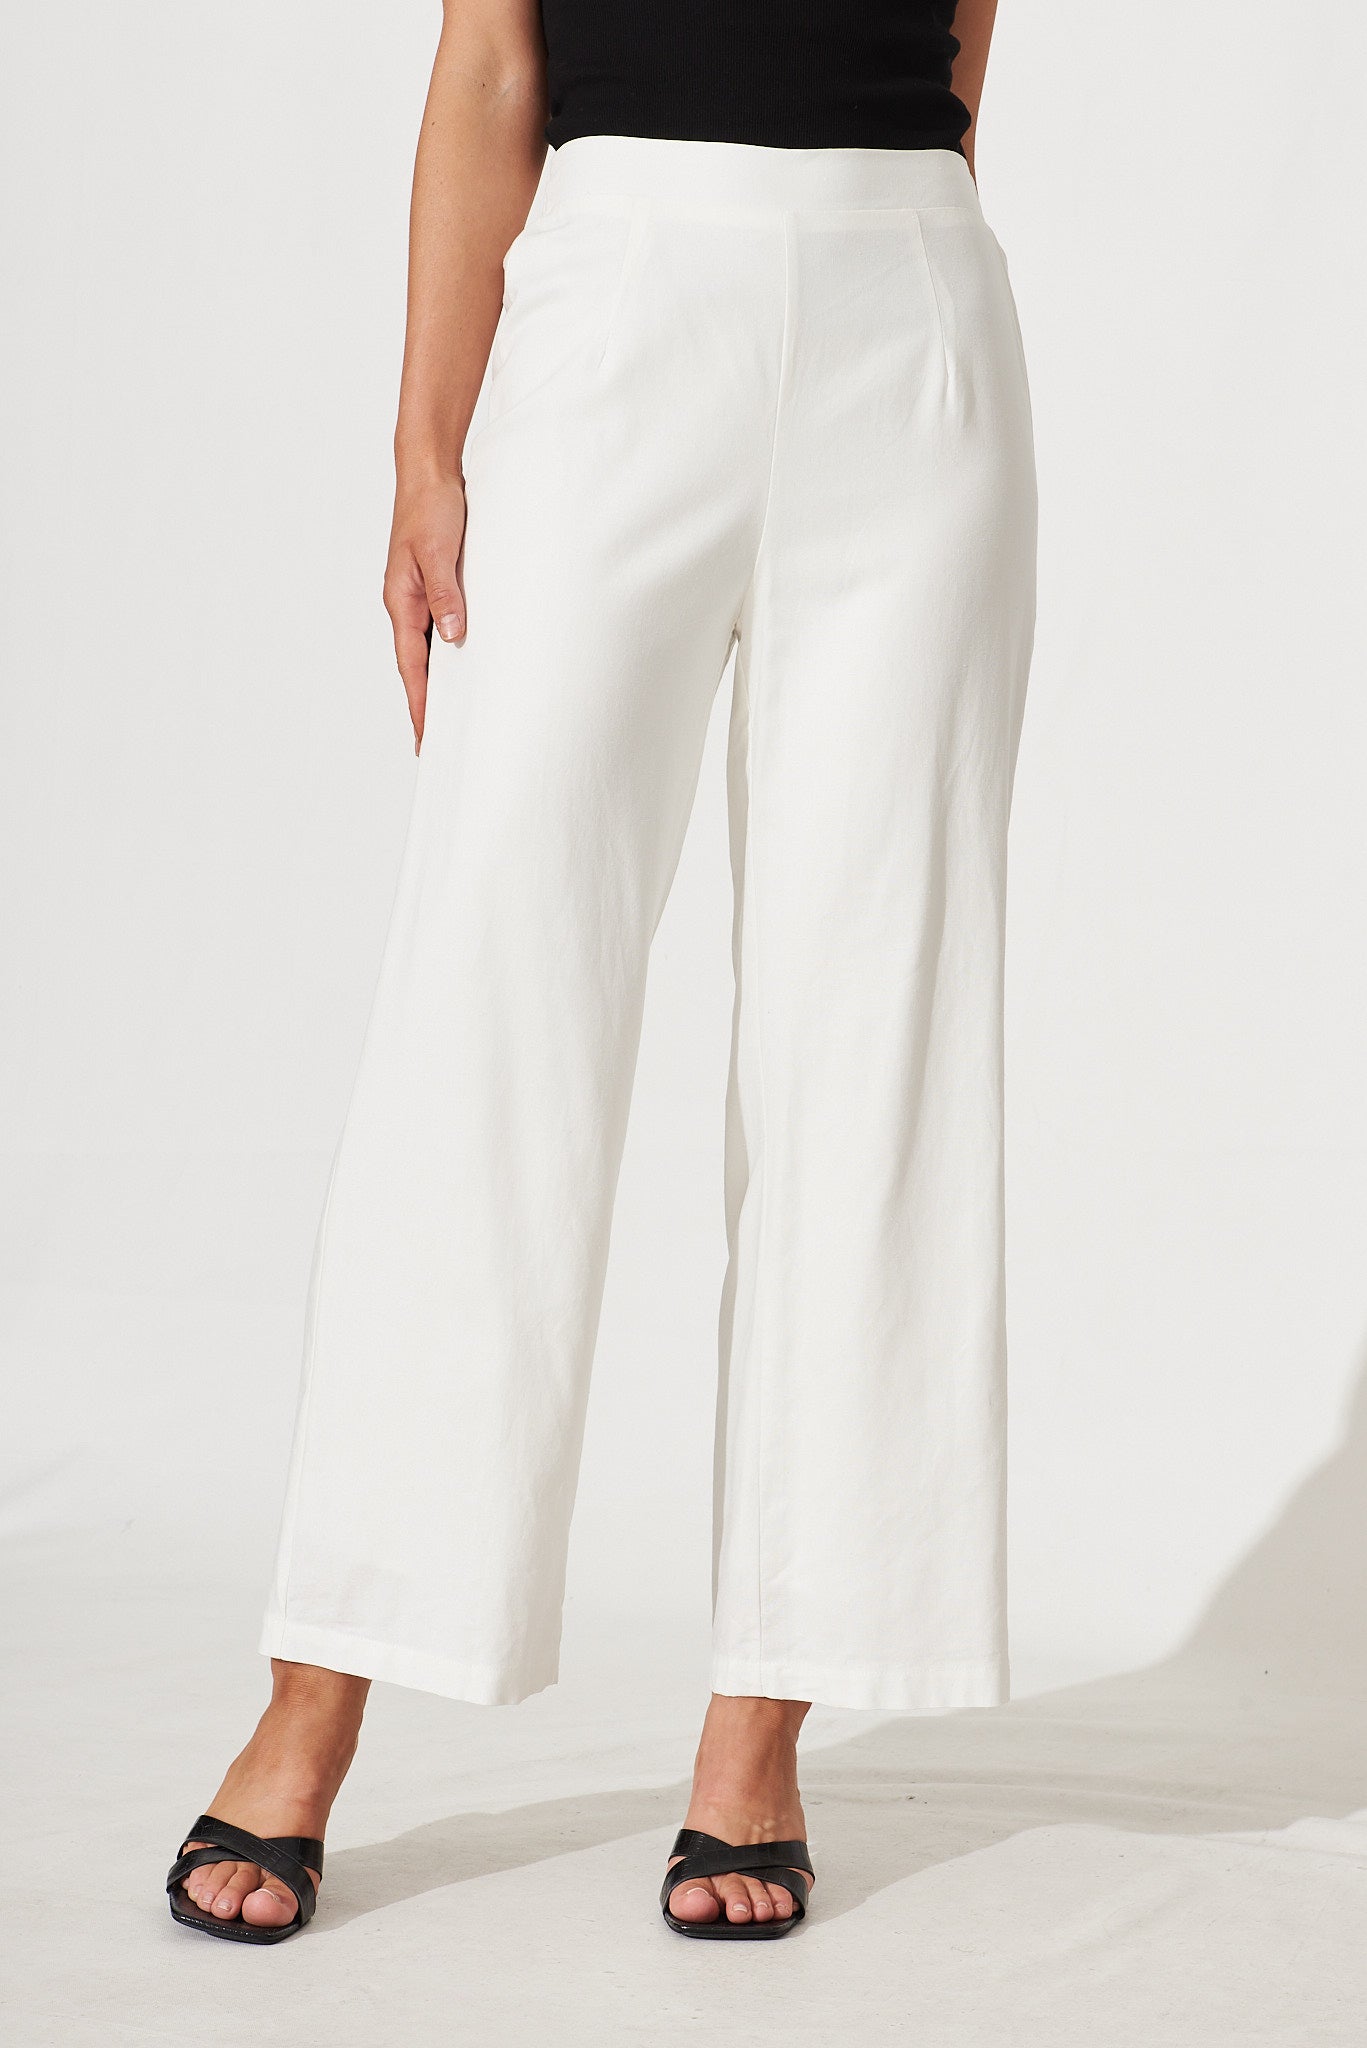 Darby Pant In White Linen Cotton Blend - front